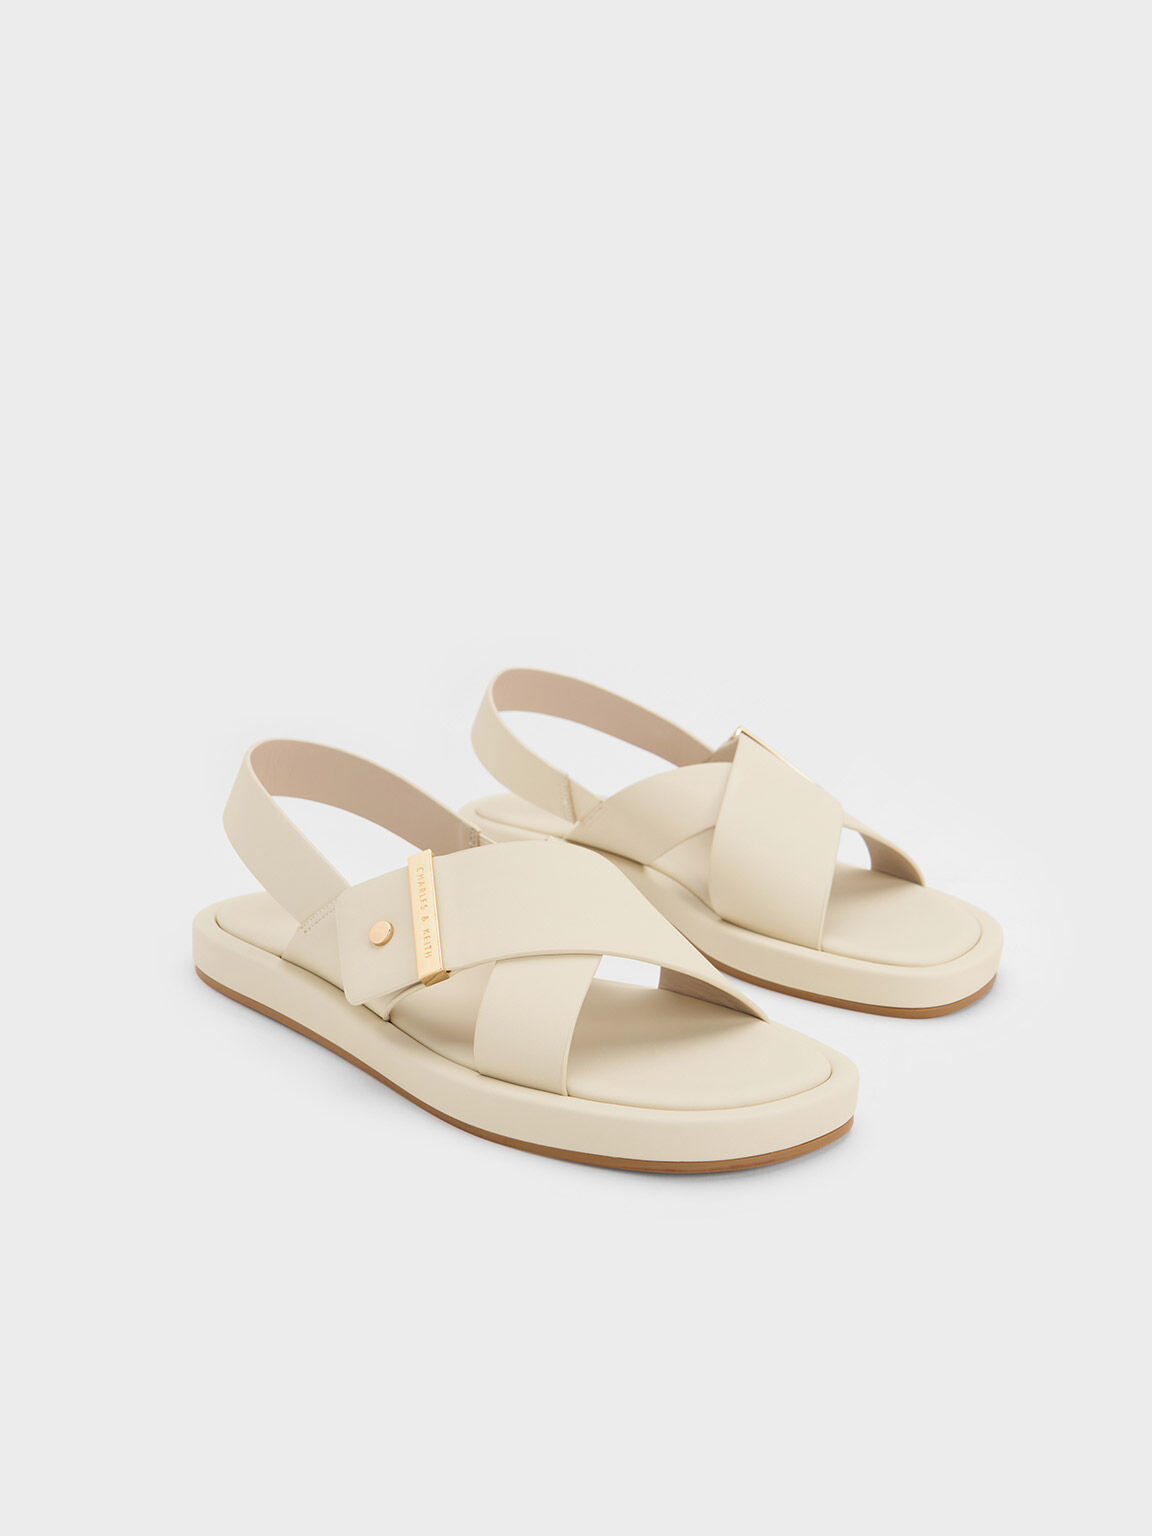 Back In Stock Styles | Shop Women’s Shoes | CHARLES & KEITH SG